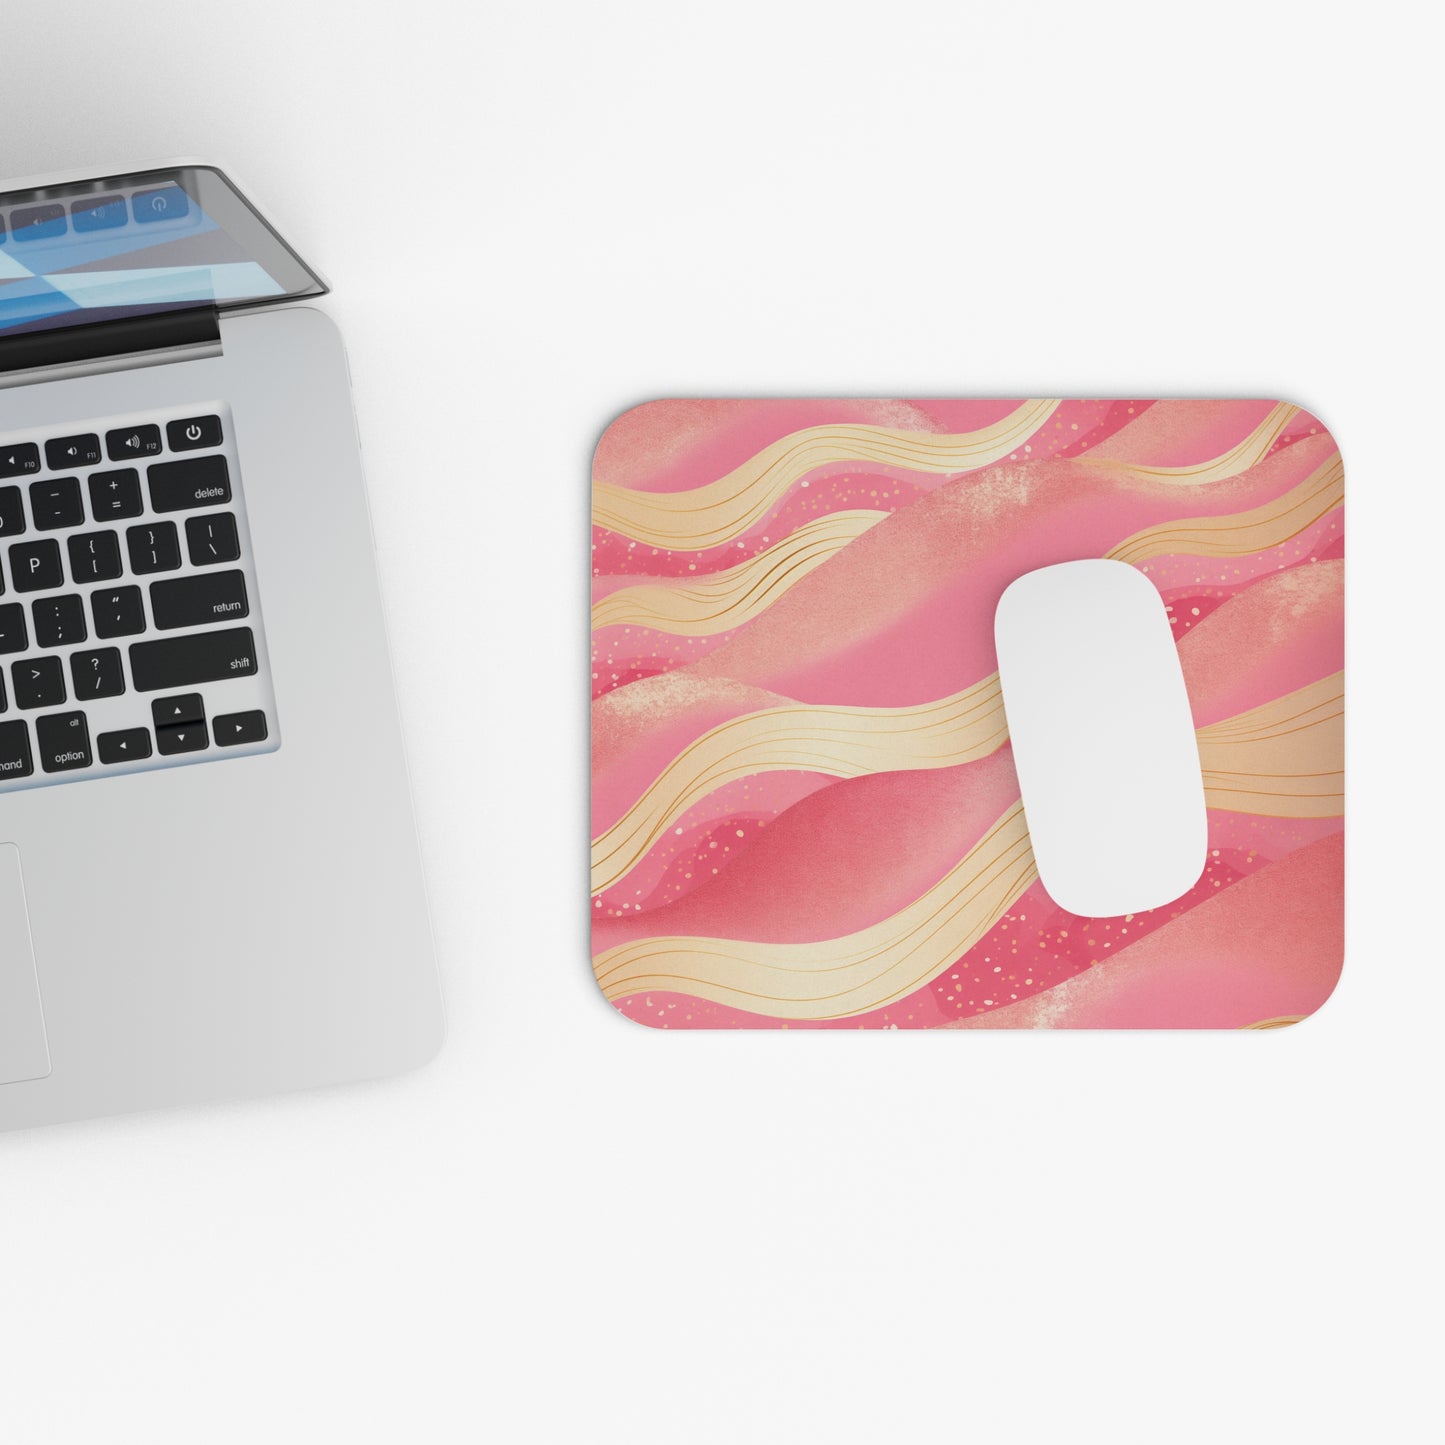 Groovy Waves Mouse Pad, Pink Gold Computer Gaming Unique Printed Desk Women Coworker Cool Decorative Aesthetic Office Square Mat